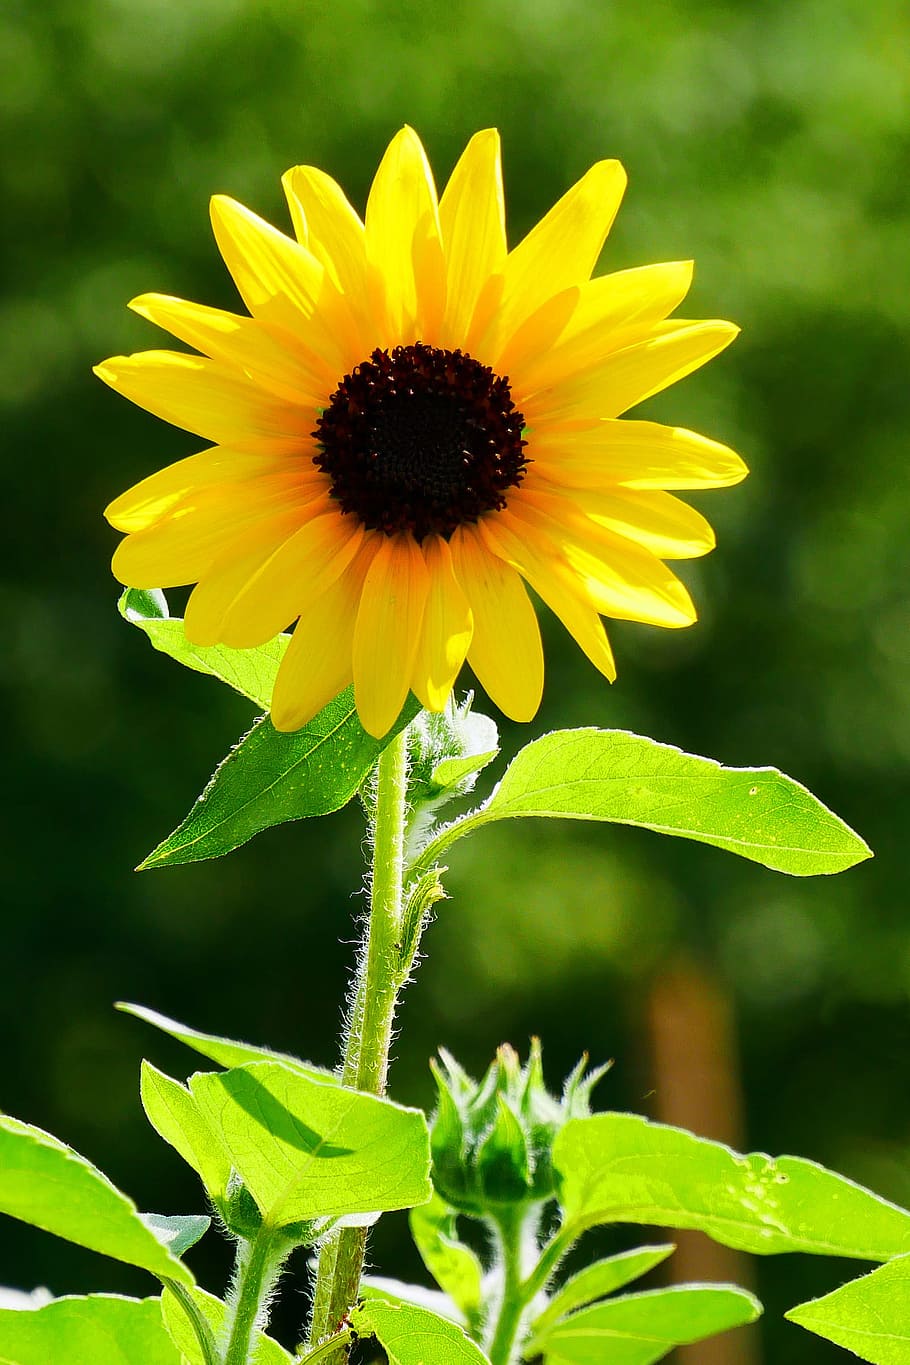 giant flowers, annual, sunflower, blooming, sunny, garden., helianthus, common sunflower, native flowers, native annuals